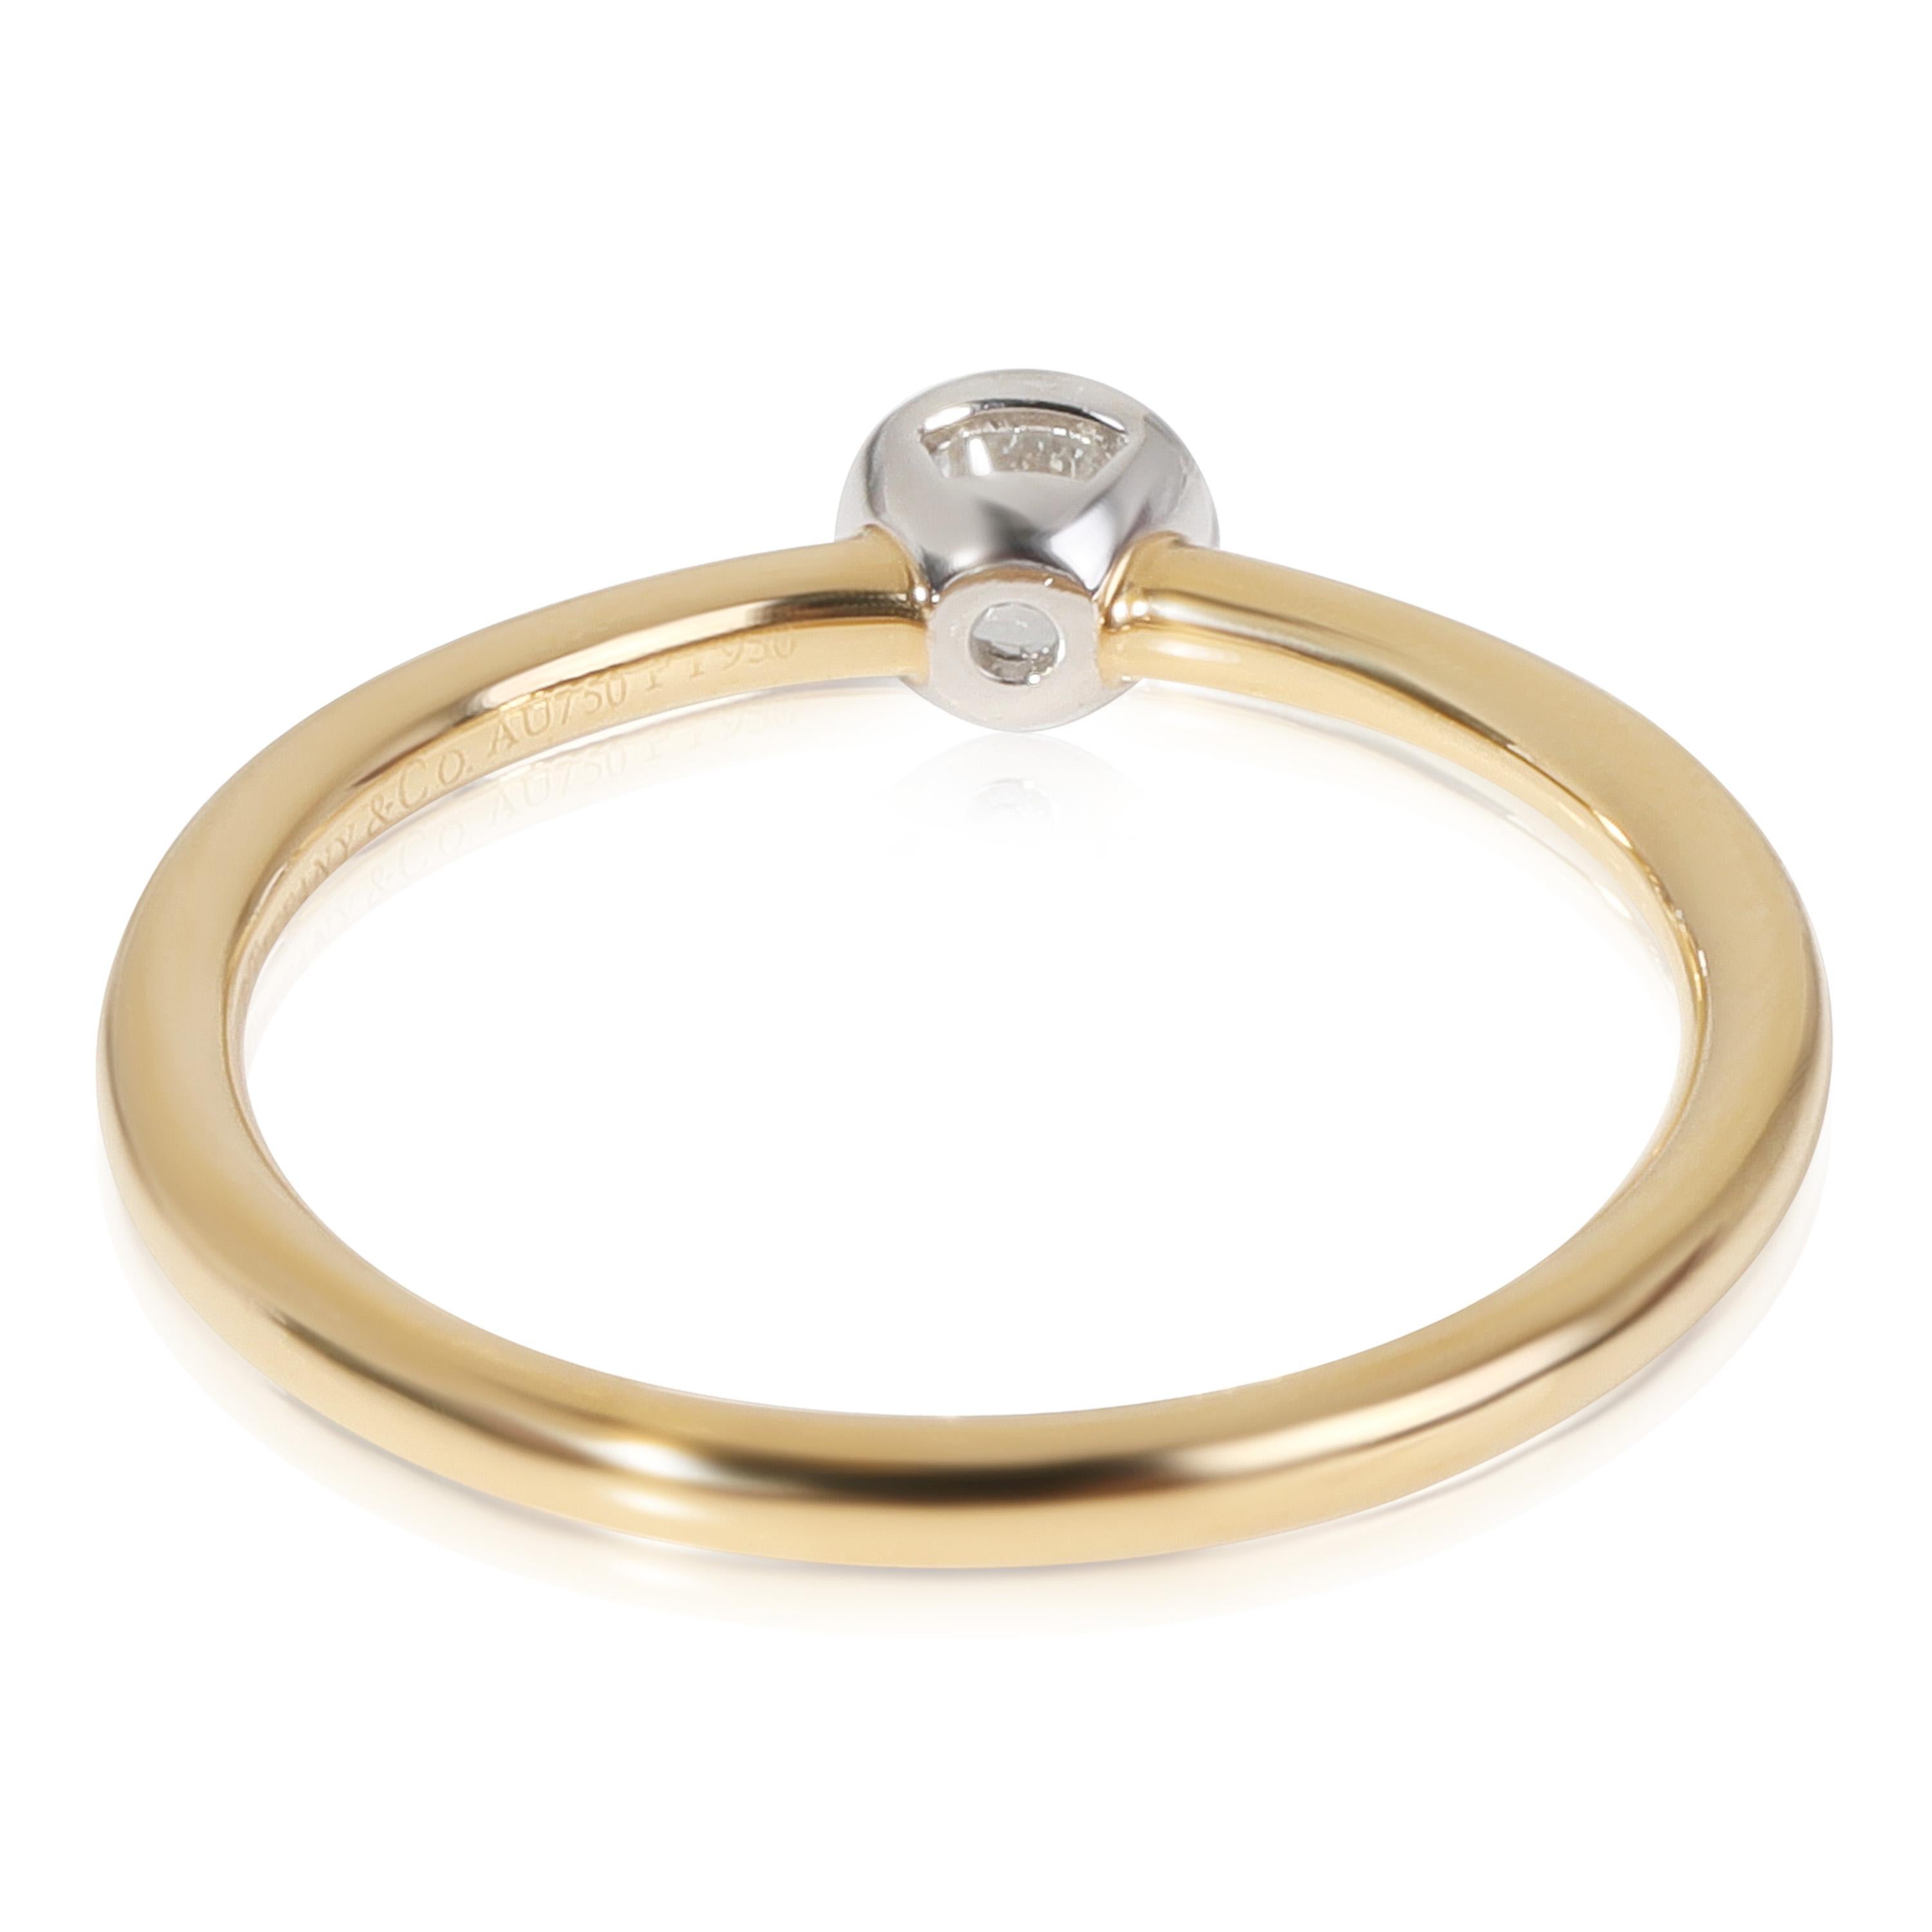 Tiffany & Co. Stackable Diamond Solitaire Ring  in 18K Yellow Gold

PRIMARY DETAILS
SKU: 118310
Listing Title: Tiffany & Co. Stackable Diamond Solitaire Ring  in 18K Yellow Gold
Condition Description: Retails for 1670 USD. In excellent condition and